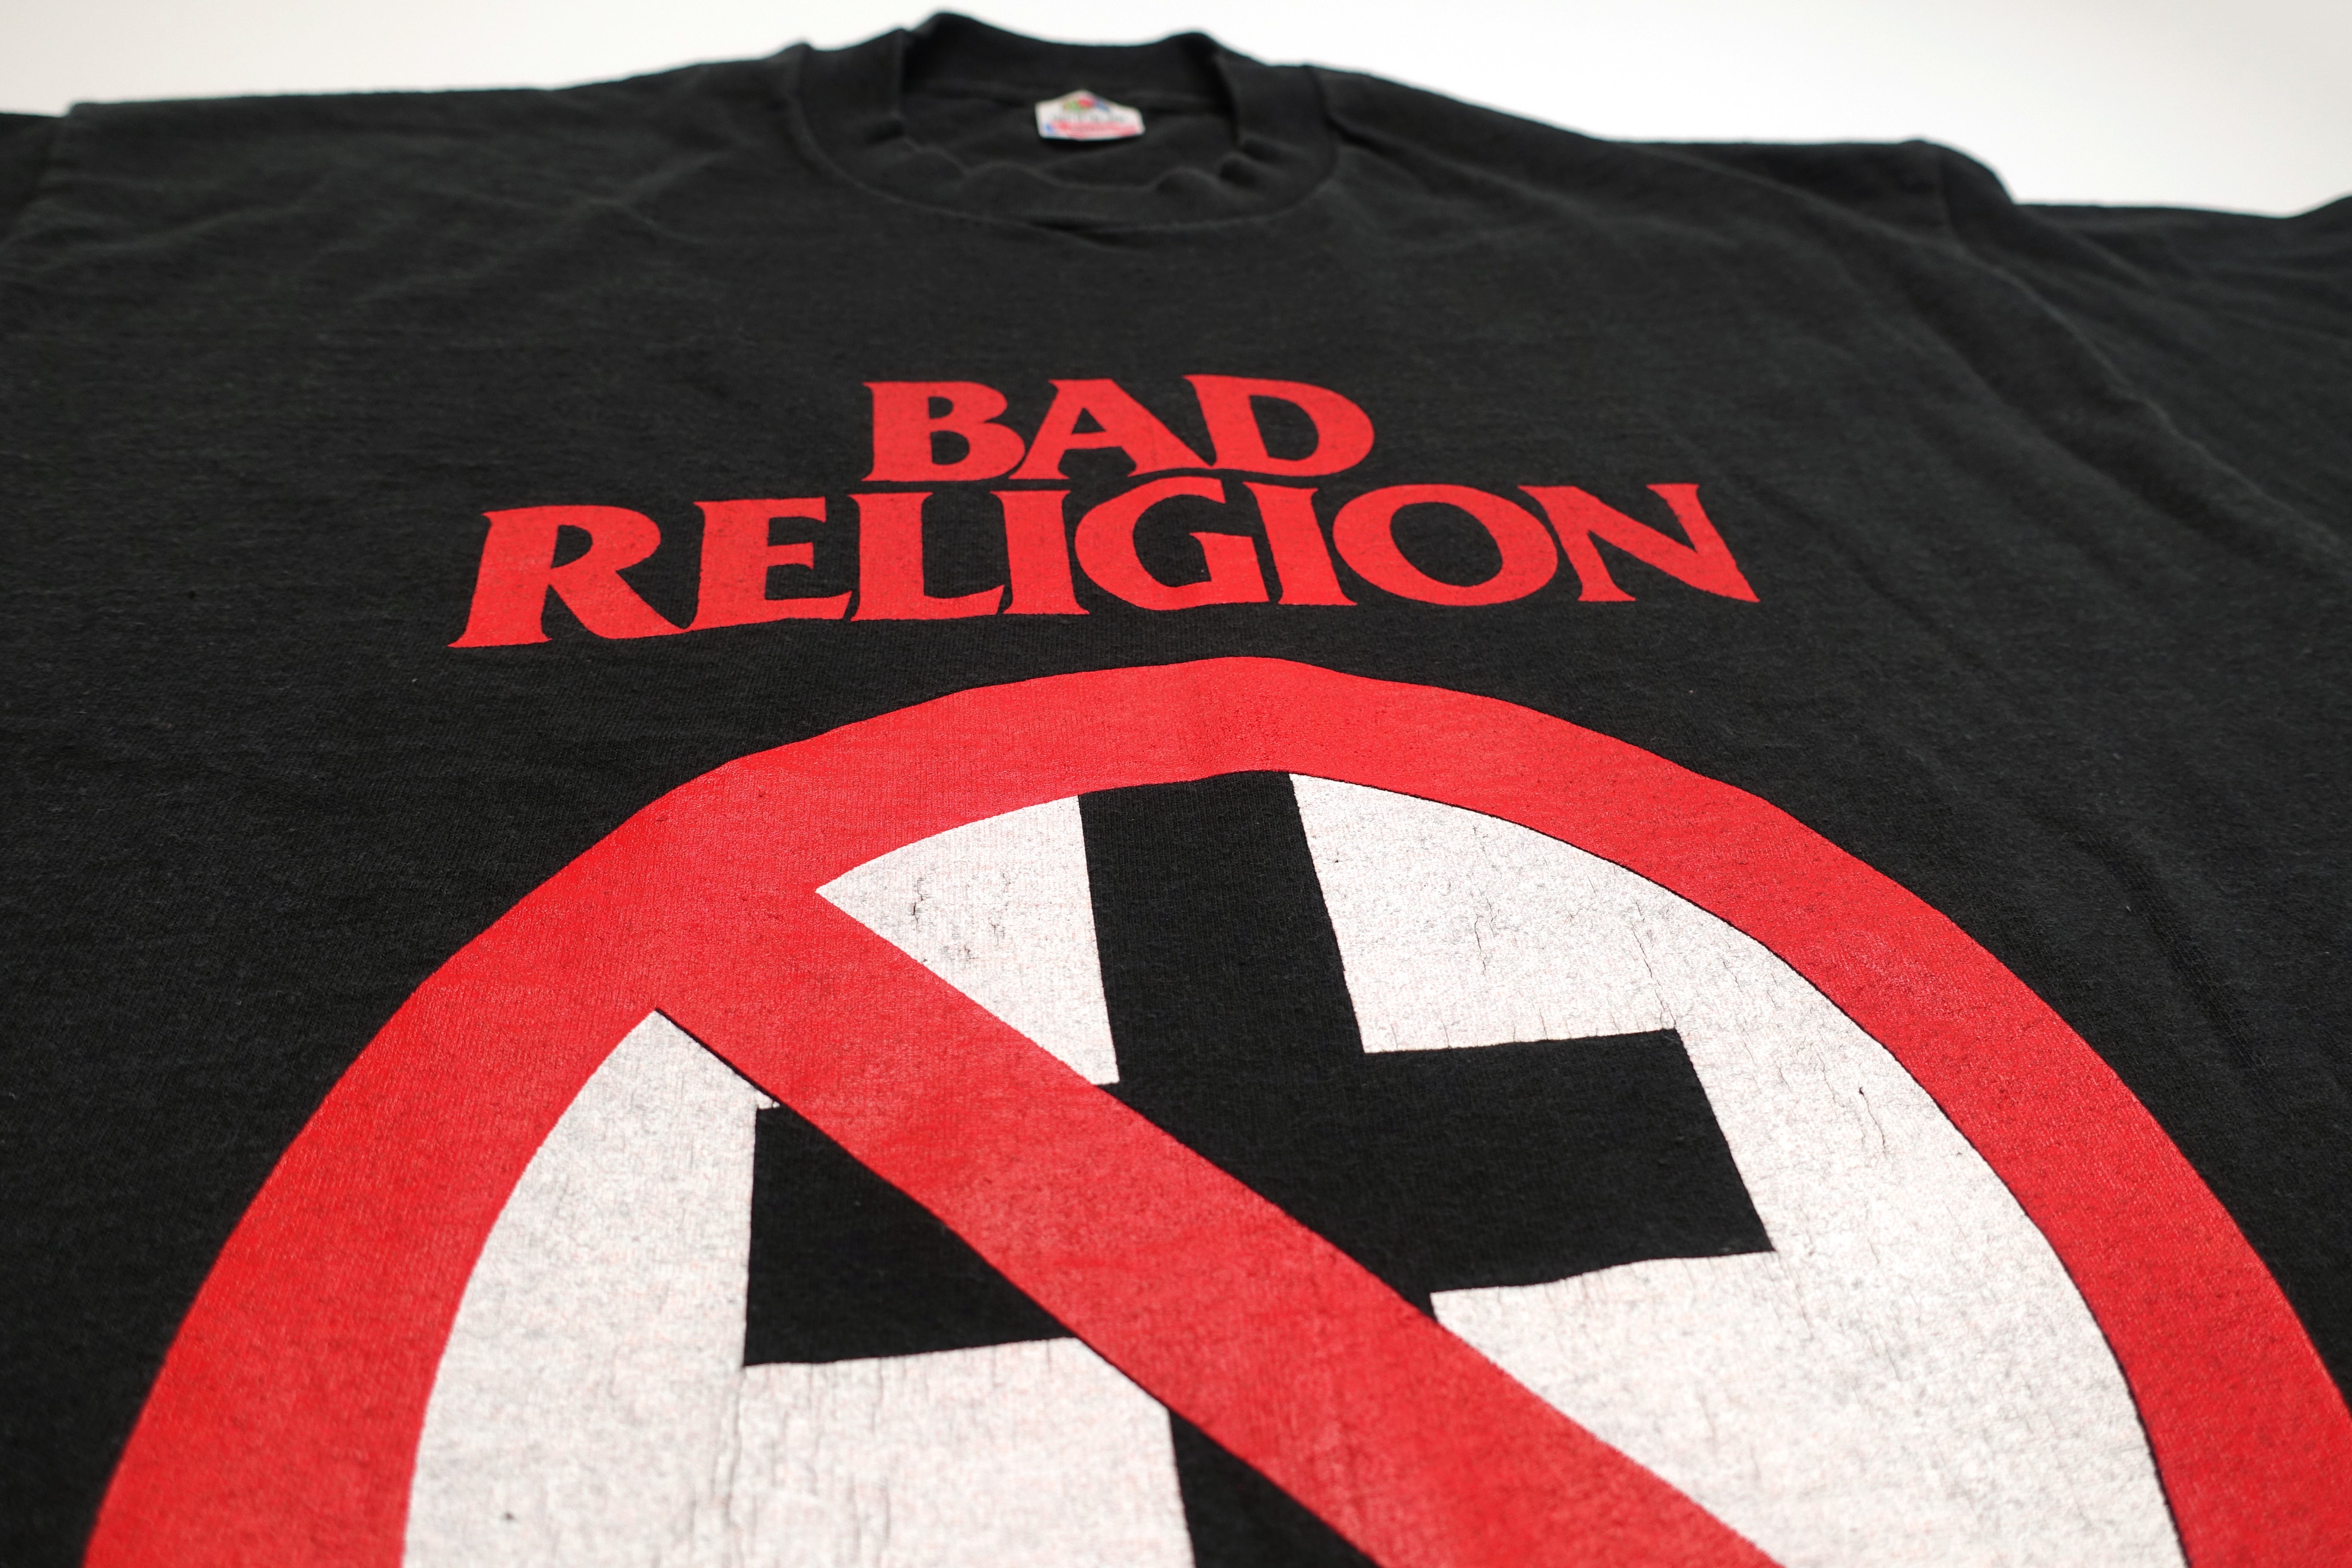 Bad Religion - Recipe For Hate 1994 North American Tour Shirt Size XL